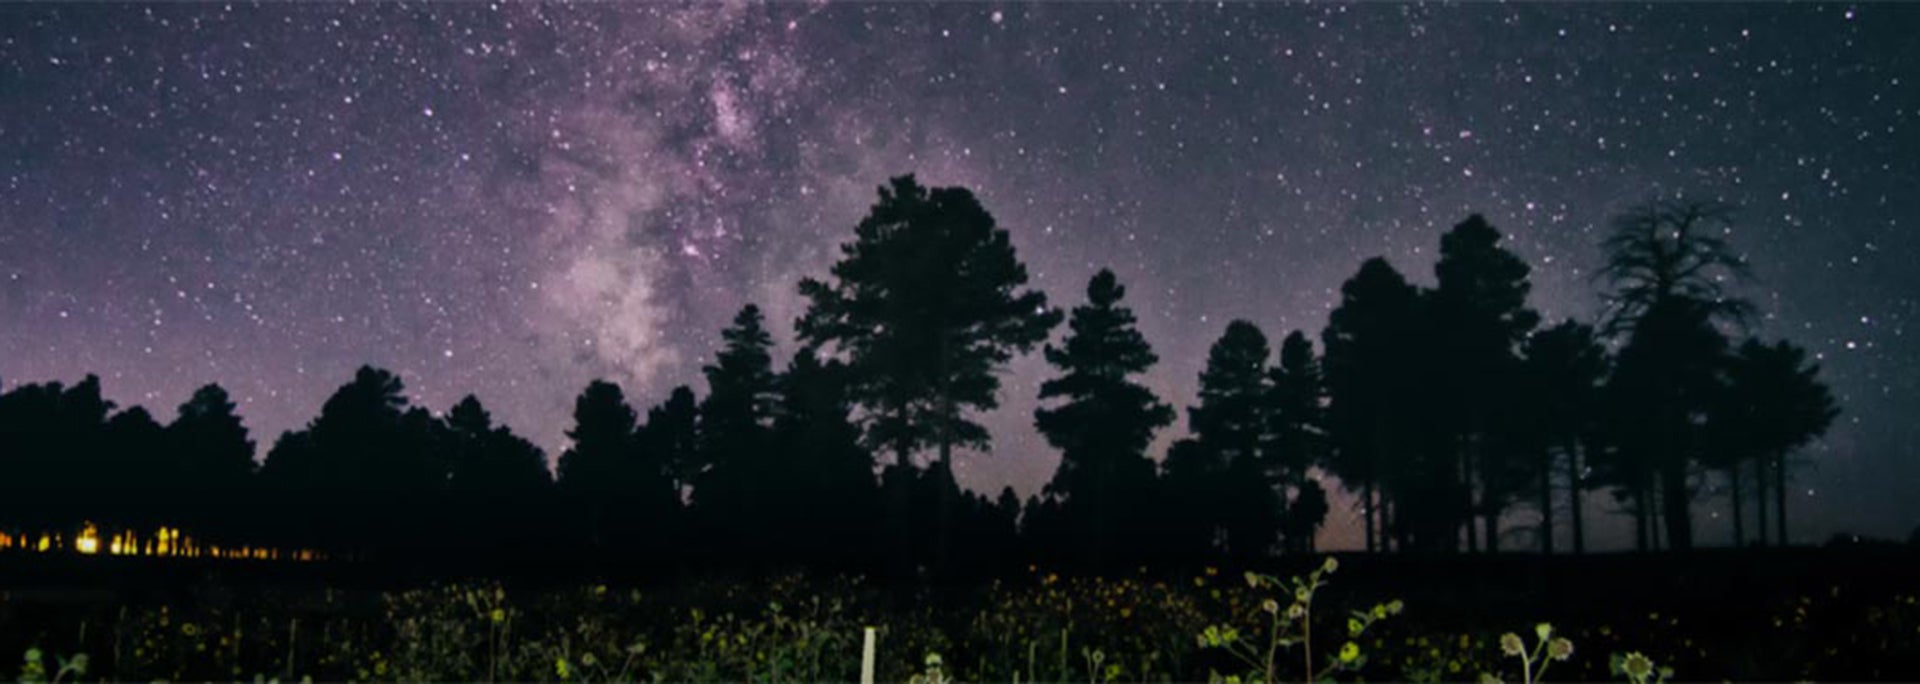 photo of forest with starry night